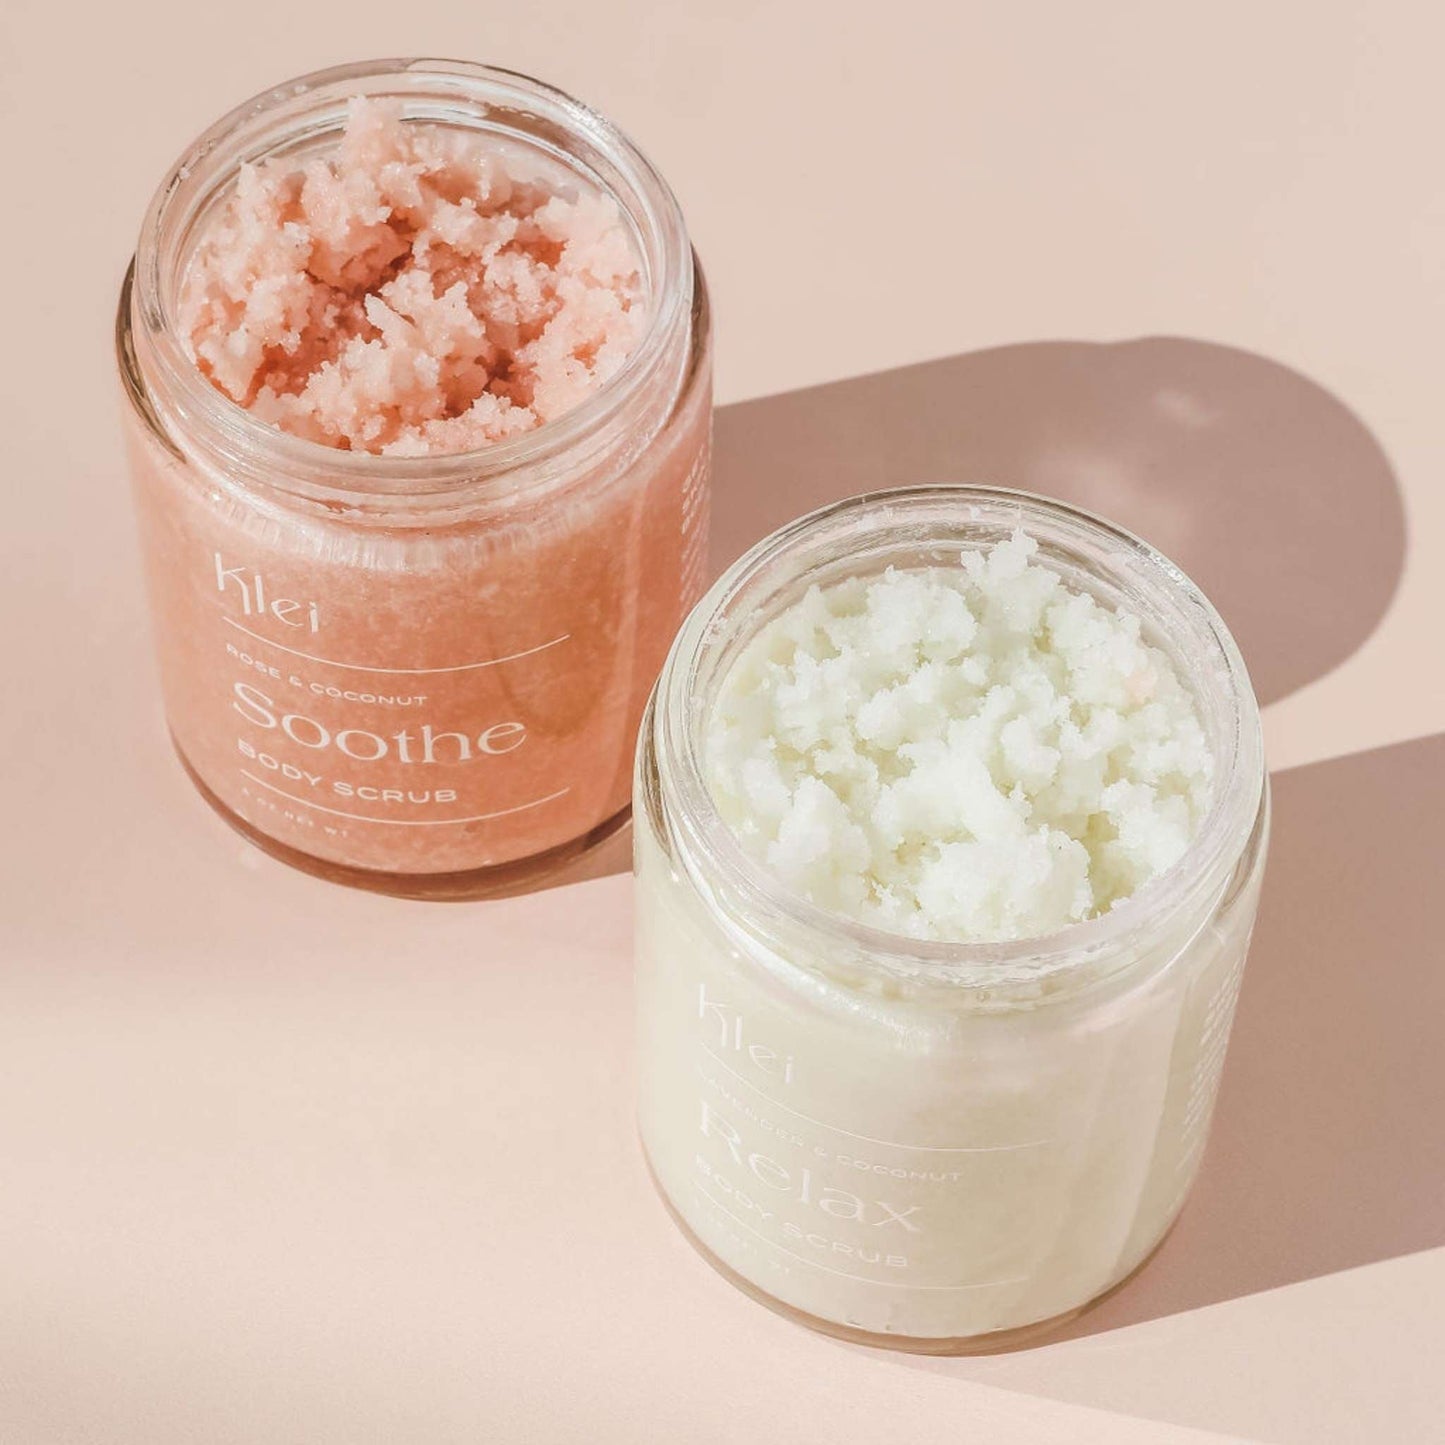 Klei: Soothe Rose & Coconut Body Scrub